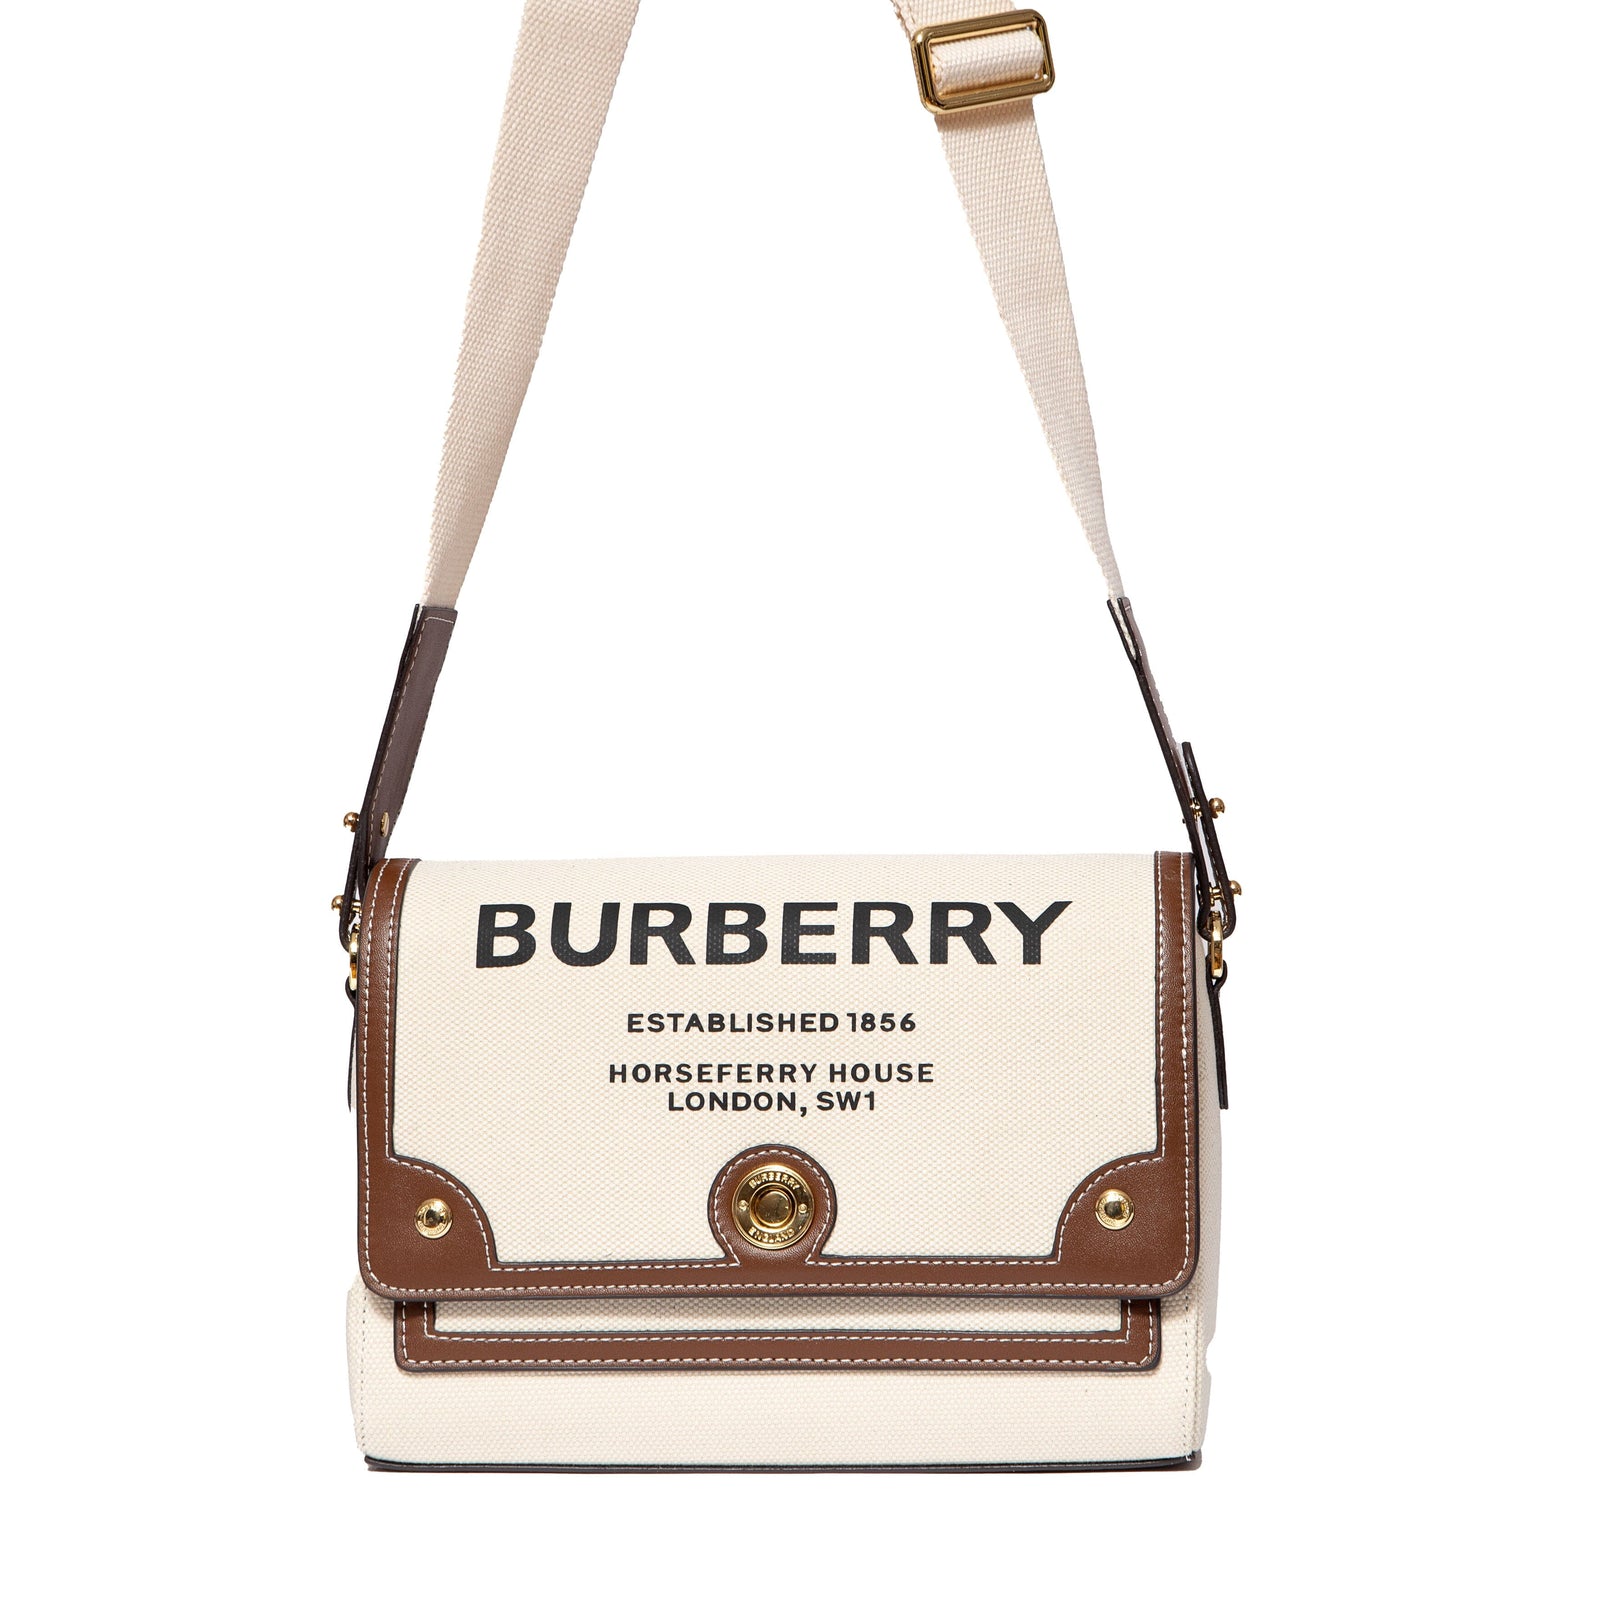 Burberry, Bags, 0 Authentic Burberry Sling Bag